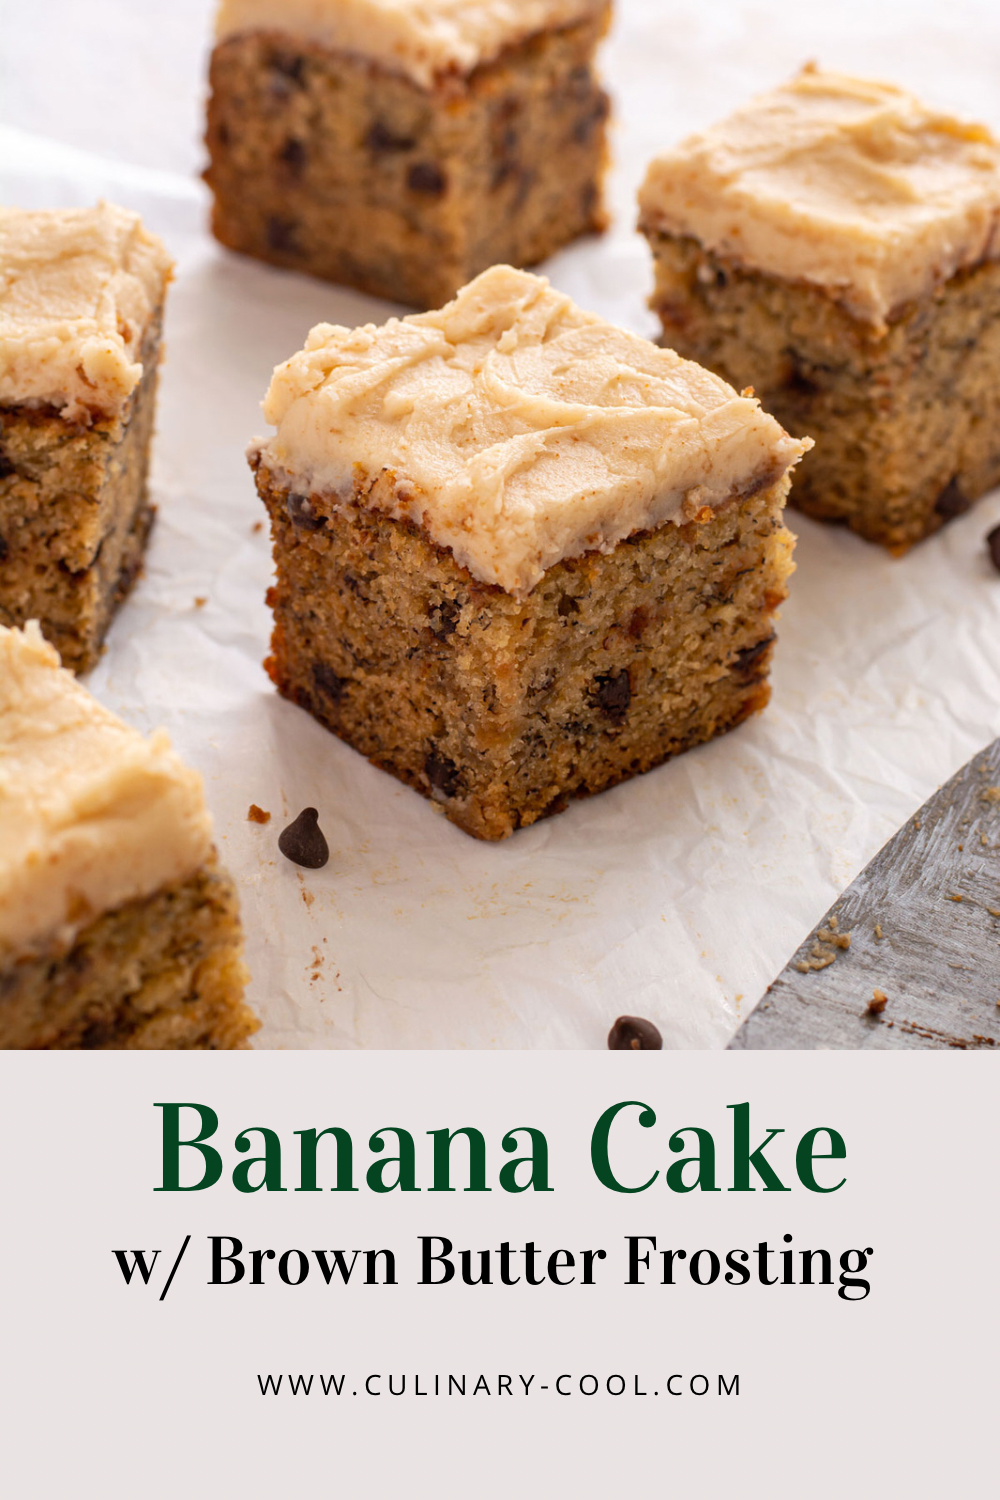 Banana Cake with Brown Butter Frosting